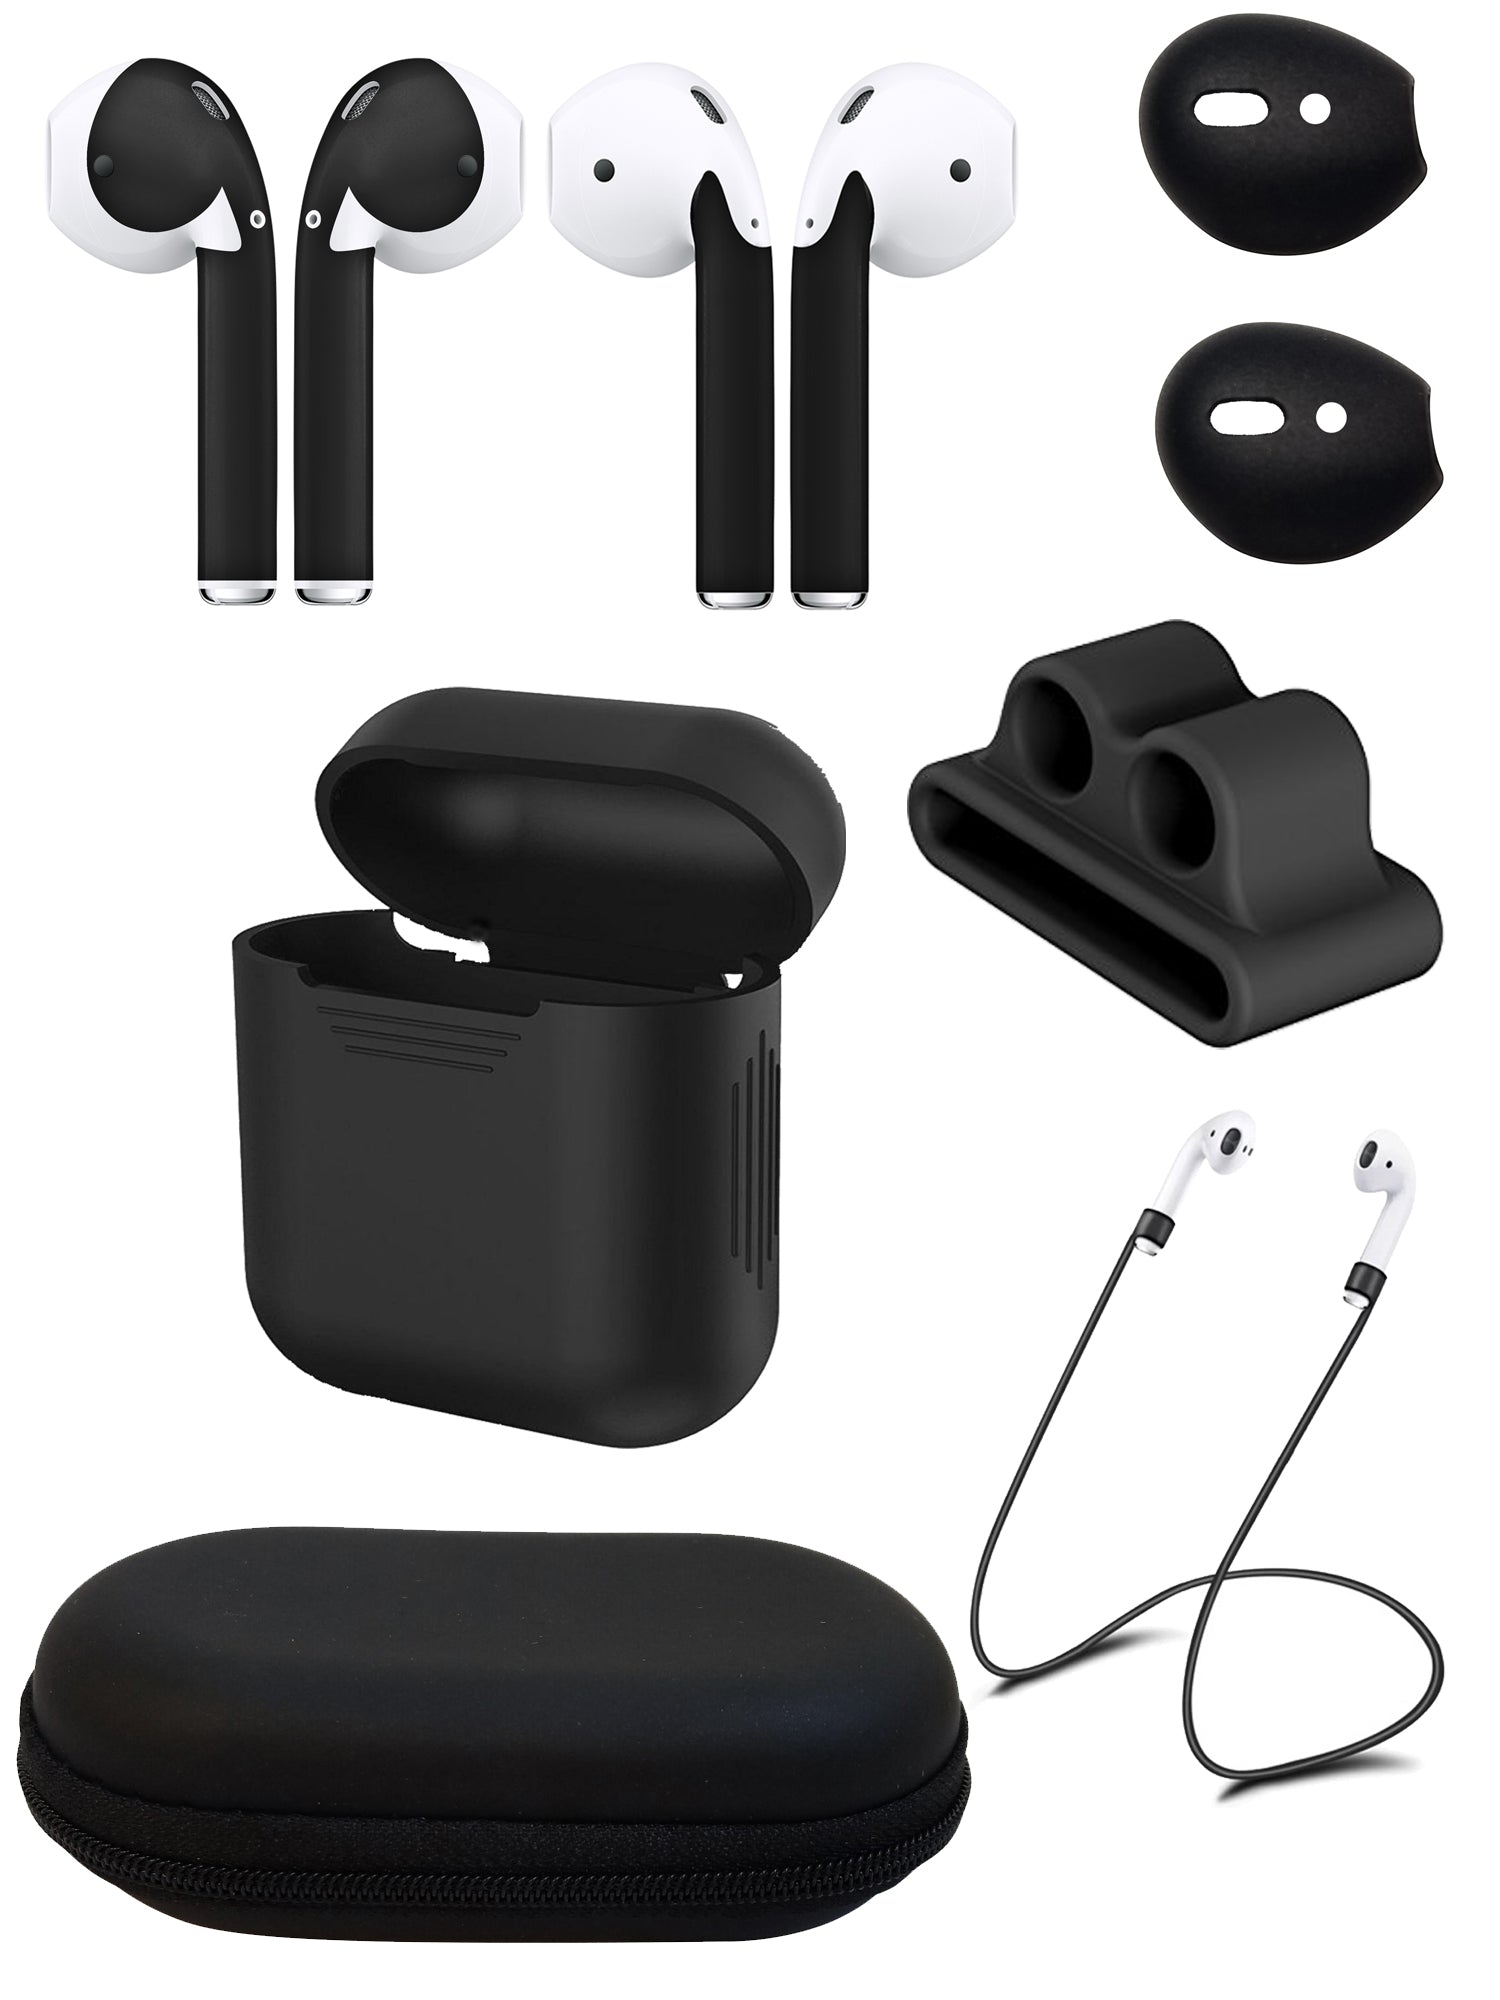 Ultimate Airpod Gift Pack - AirPod Skins, Case, Straps, Band